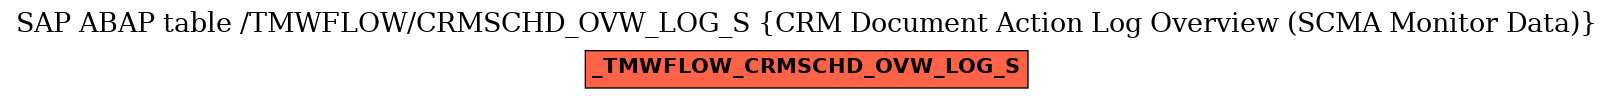 E-R Diagram for table /TMWFLOW/CRMSCHD_OVW_LOG_S (CRM Document Action Log Overview (SCMA Monitor Data))